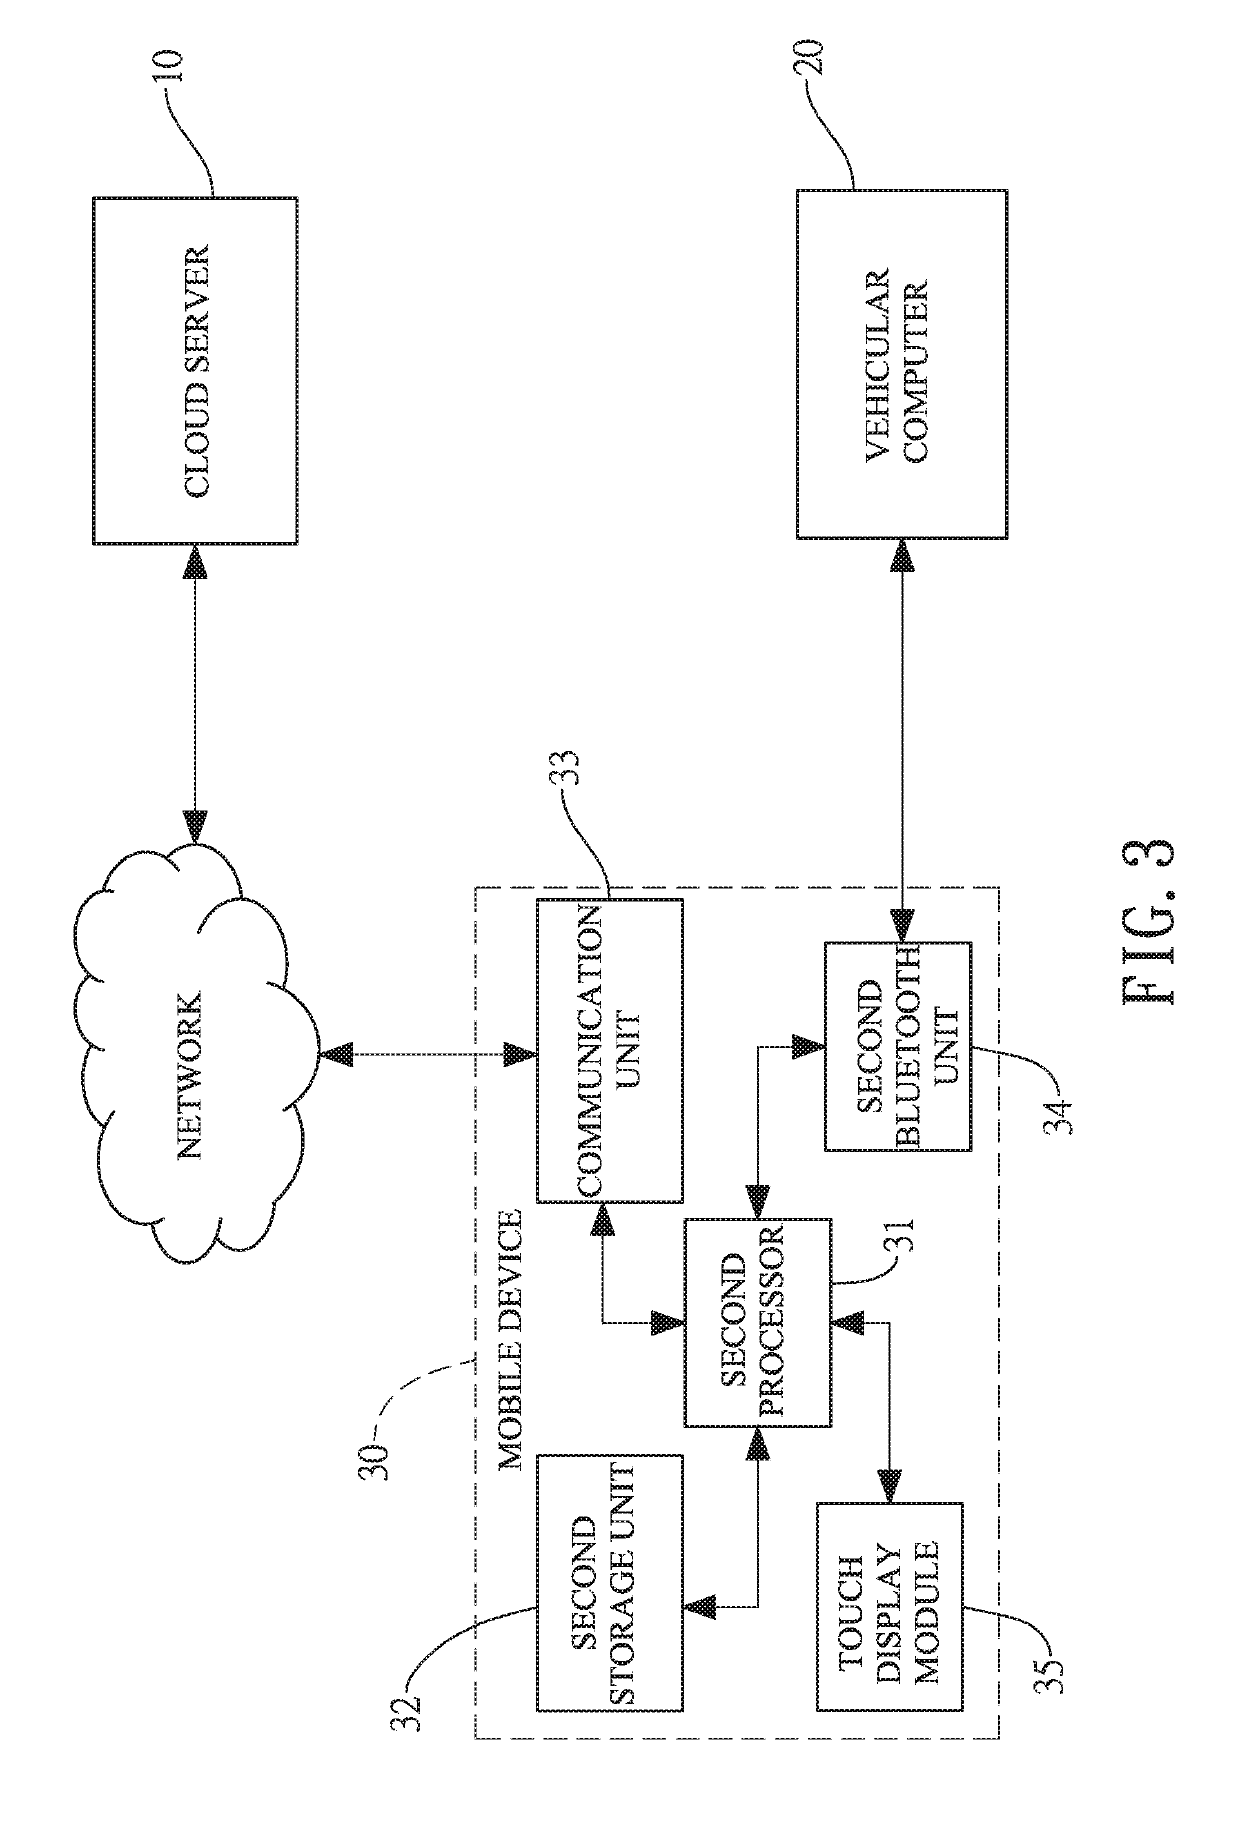 Internet of vehicles system performing connection authentication through a public network and connection method